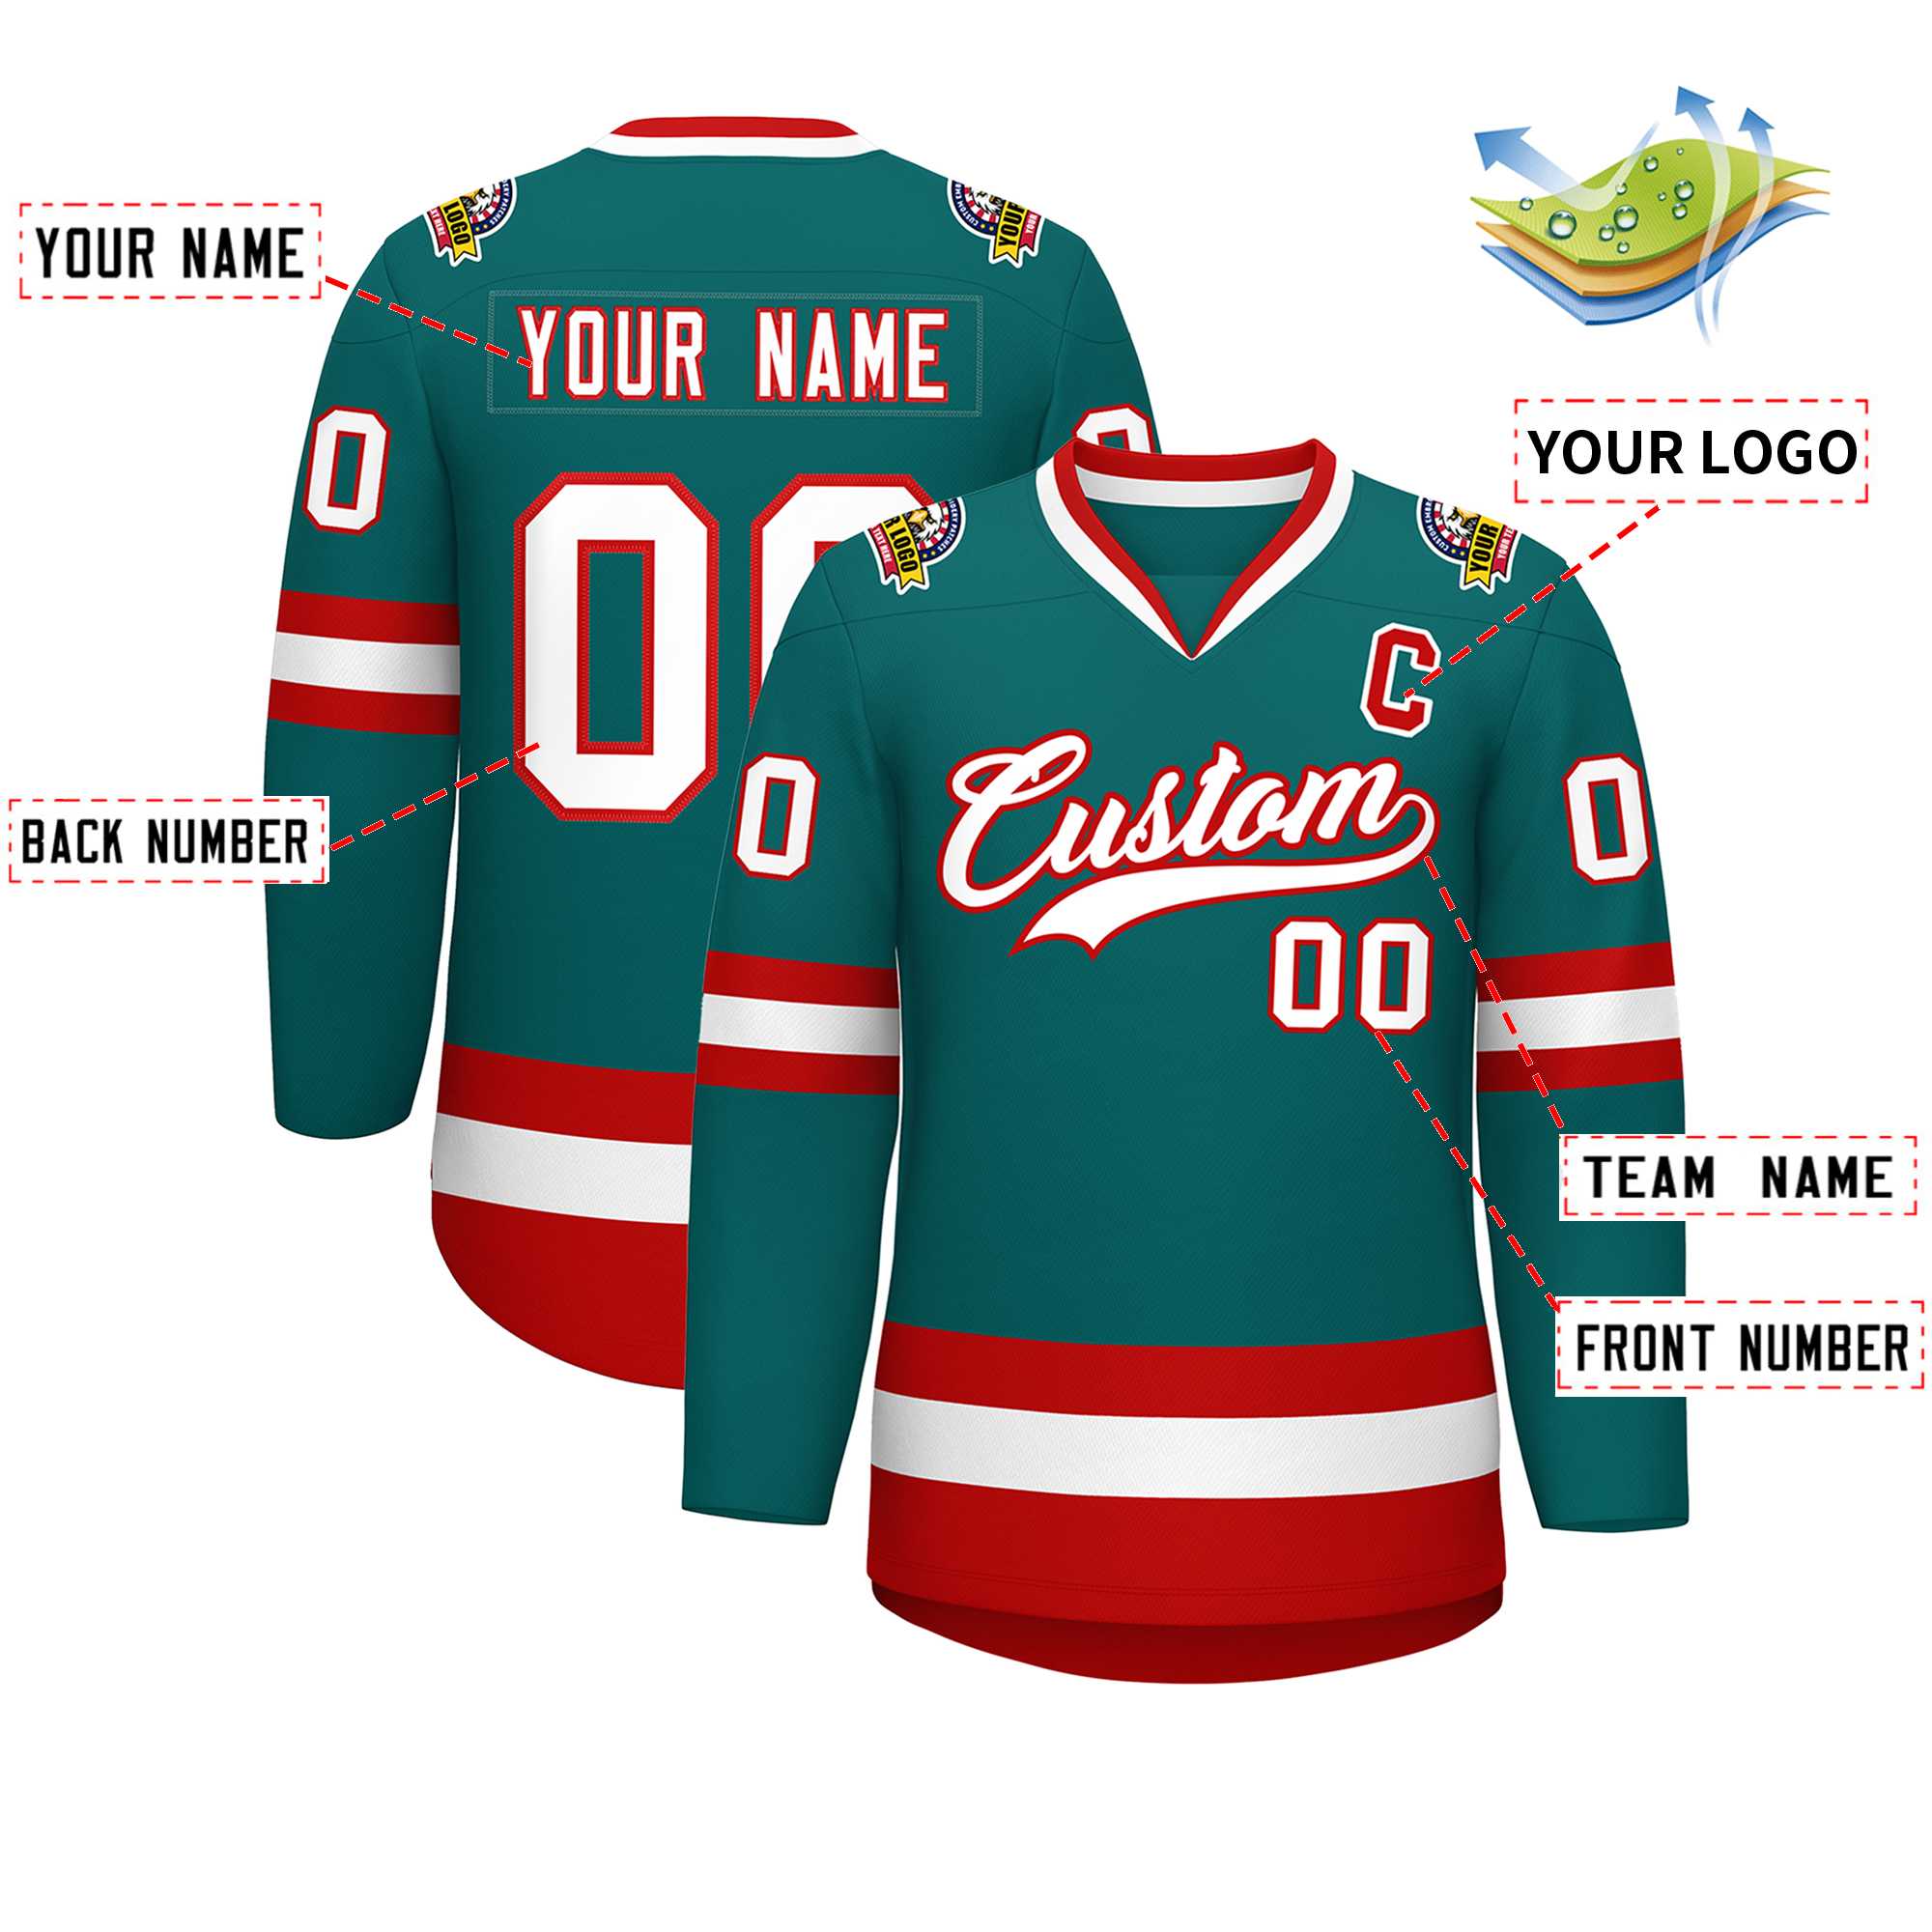 Custom Teal White-Red Classic Style Hockey Jersey